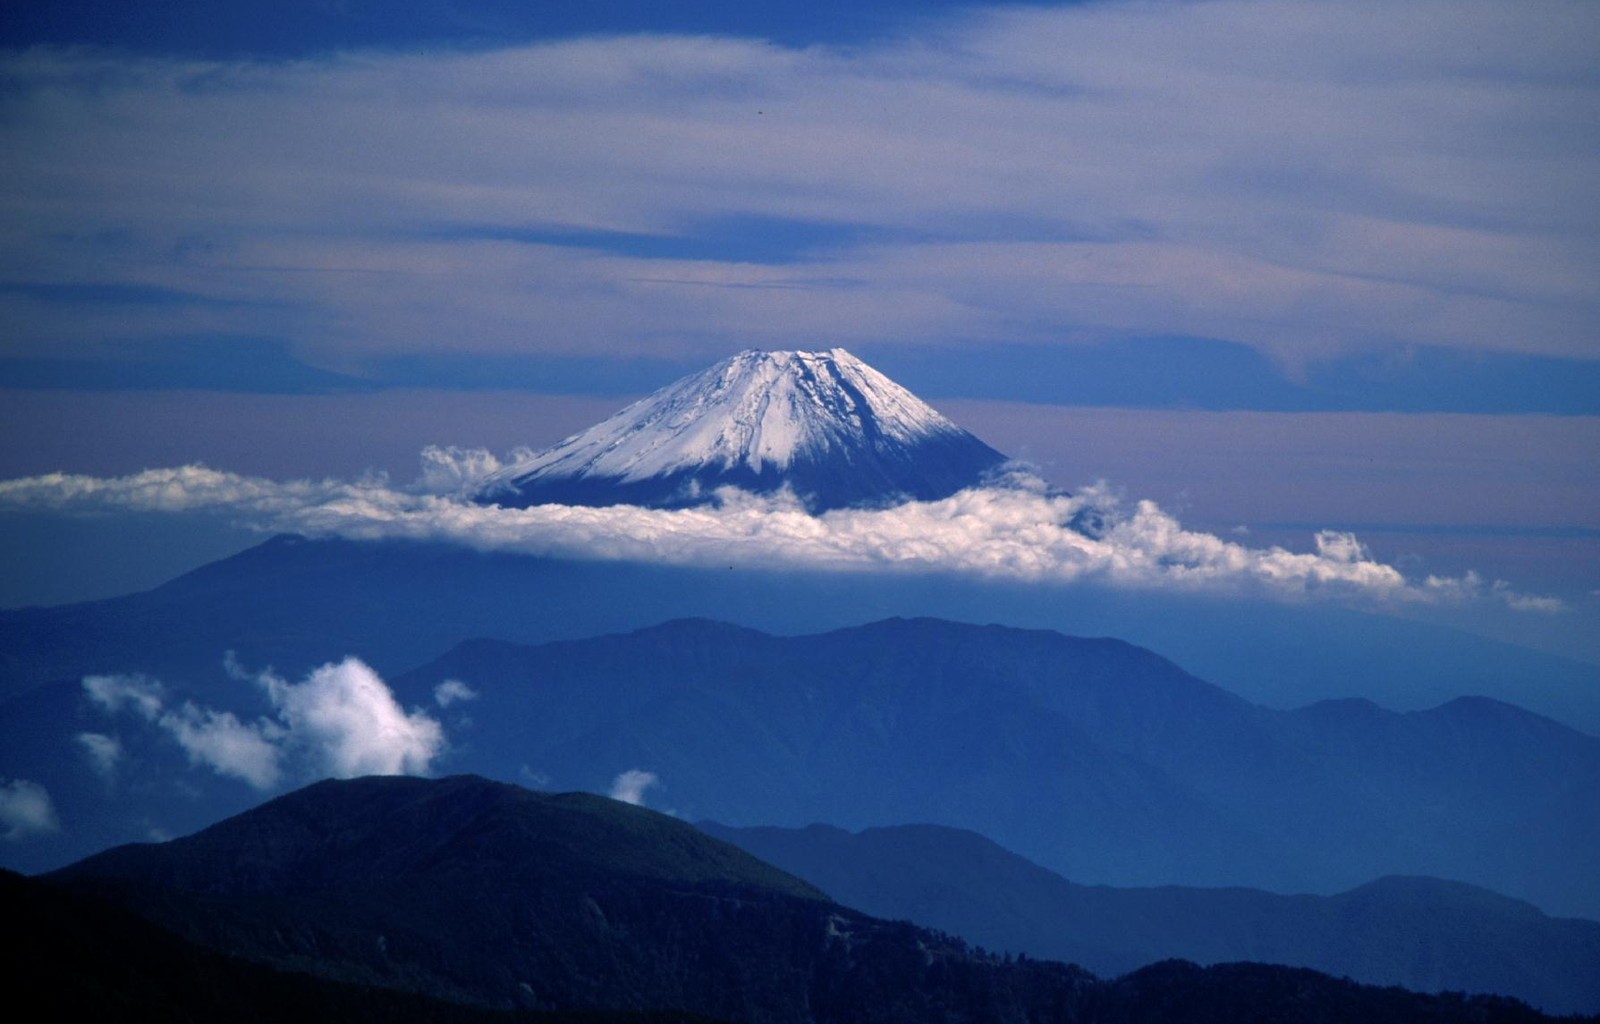 Mount Fujiyama, an active stratovolcano, i steh tallest mountain in Japan, at 12,389 feet (3,776.24 meters). It i sapproximately 62 miles (100 kilometers) southwest of Tokyo on the island of Hinshu.